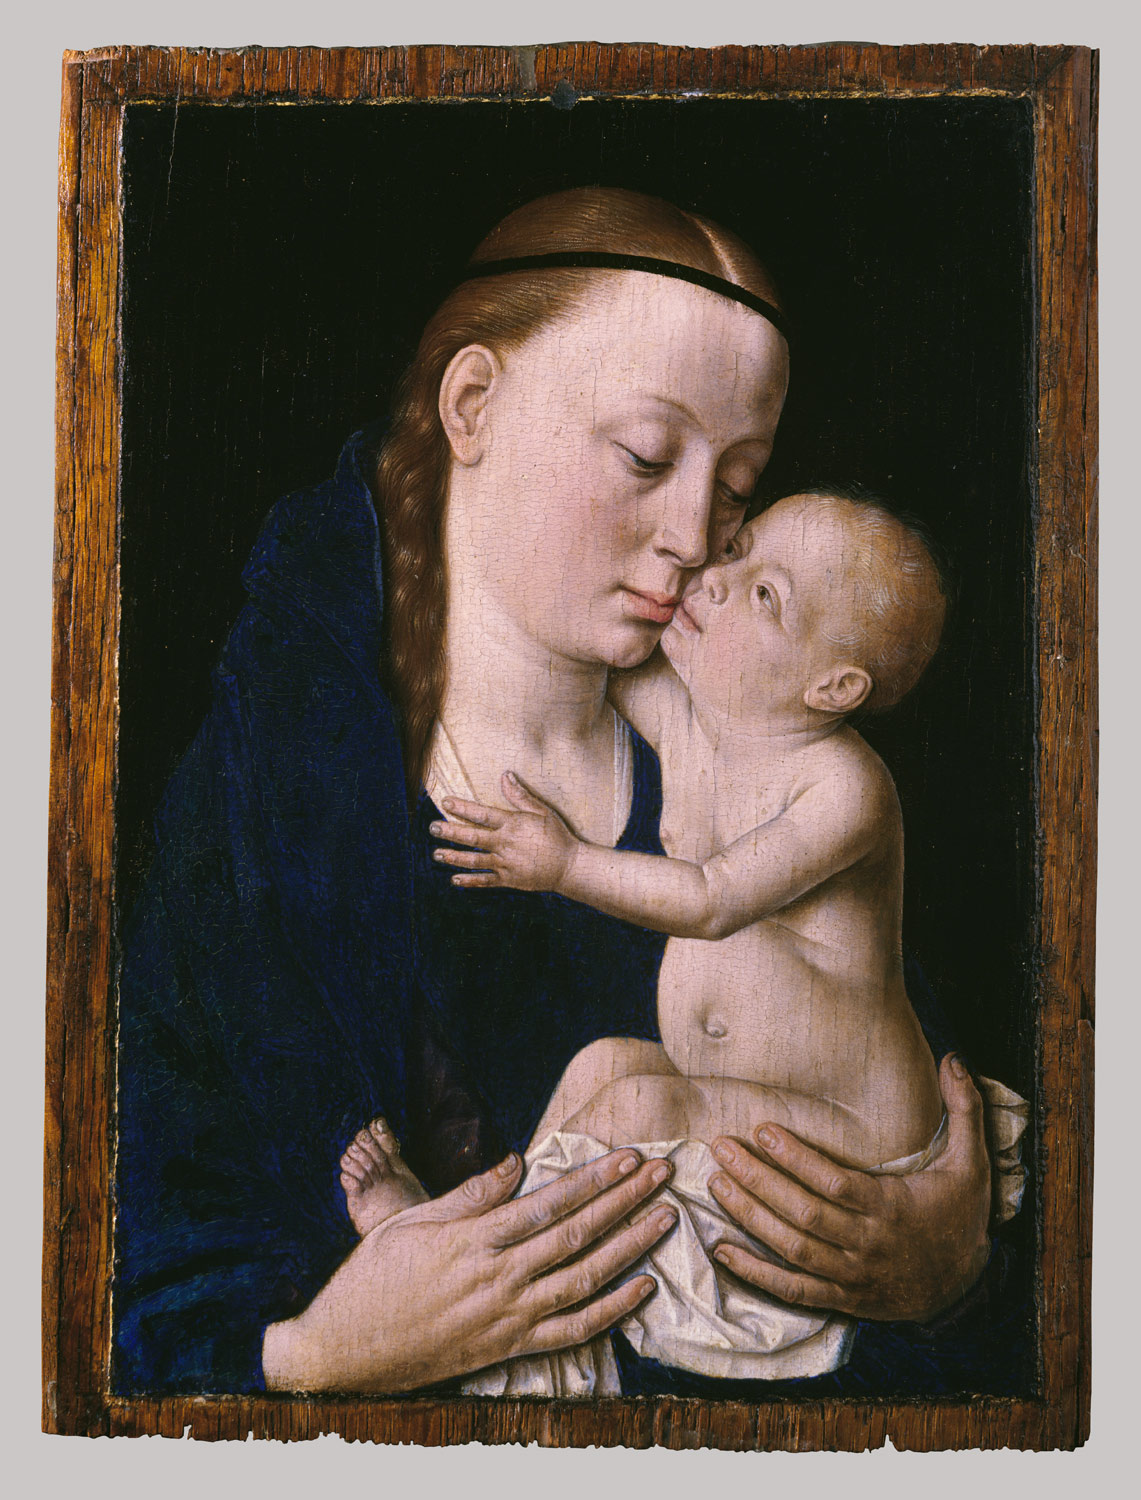 Virgin and Child by Dieric Bouts, c. 1600 [Metropolitan Museum, NYC]